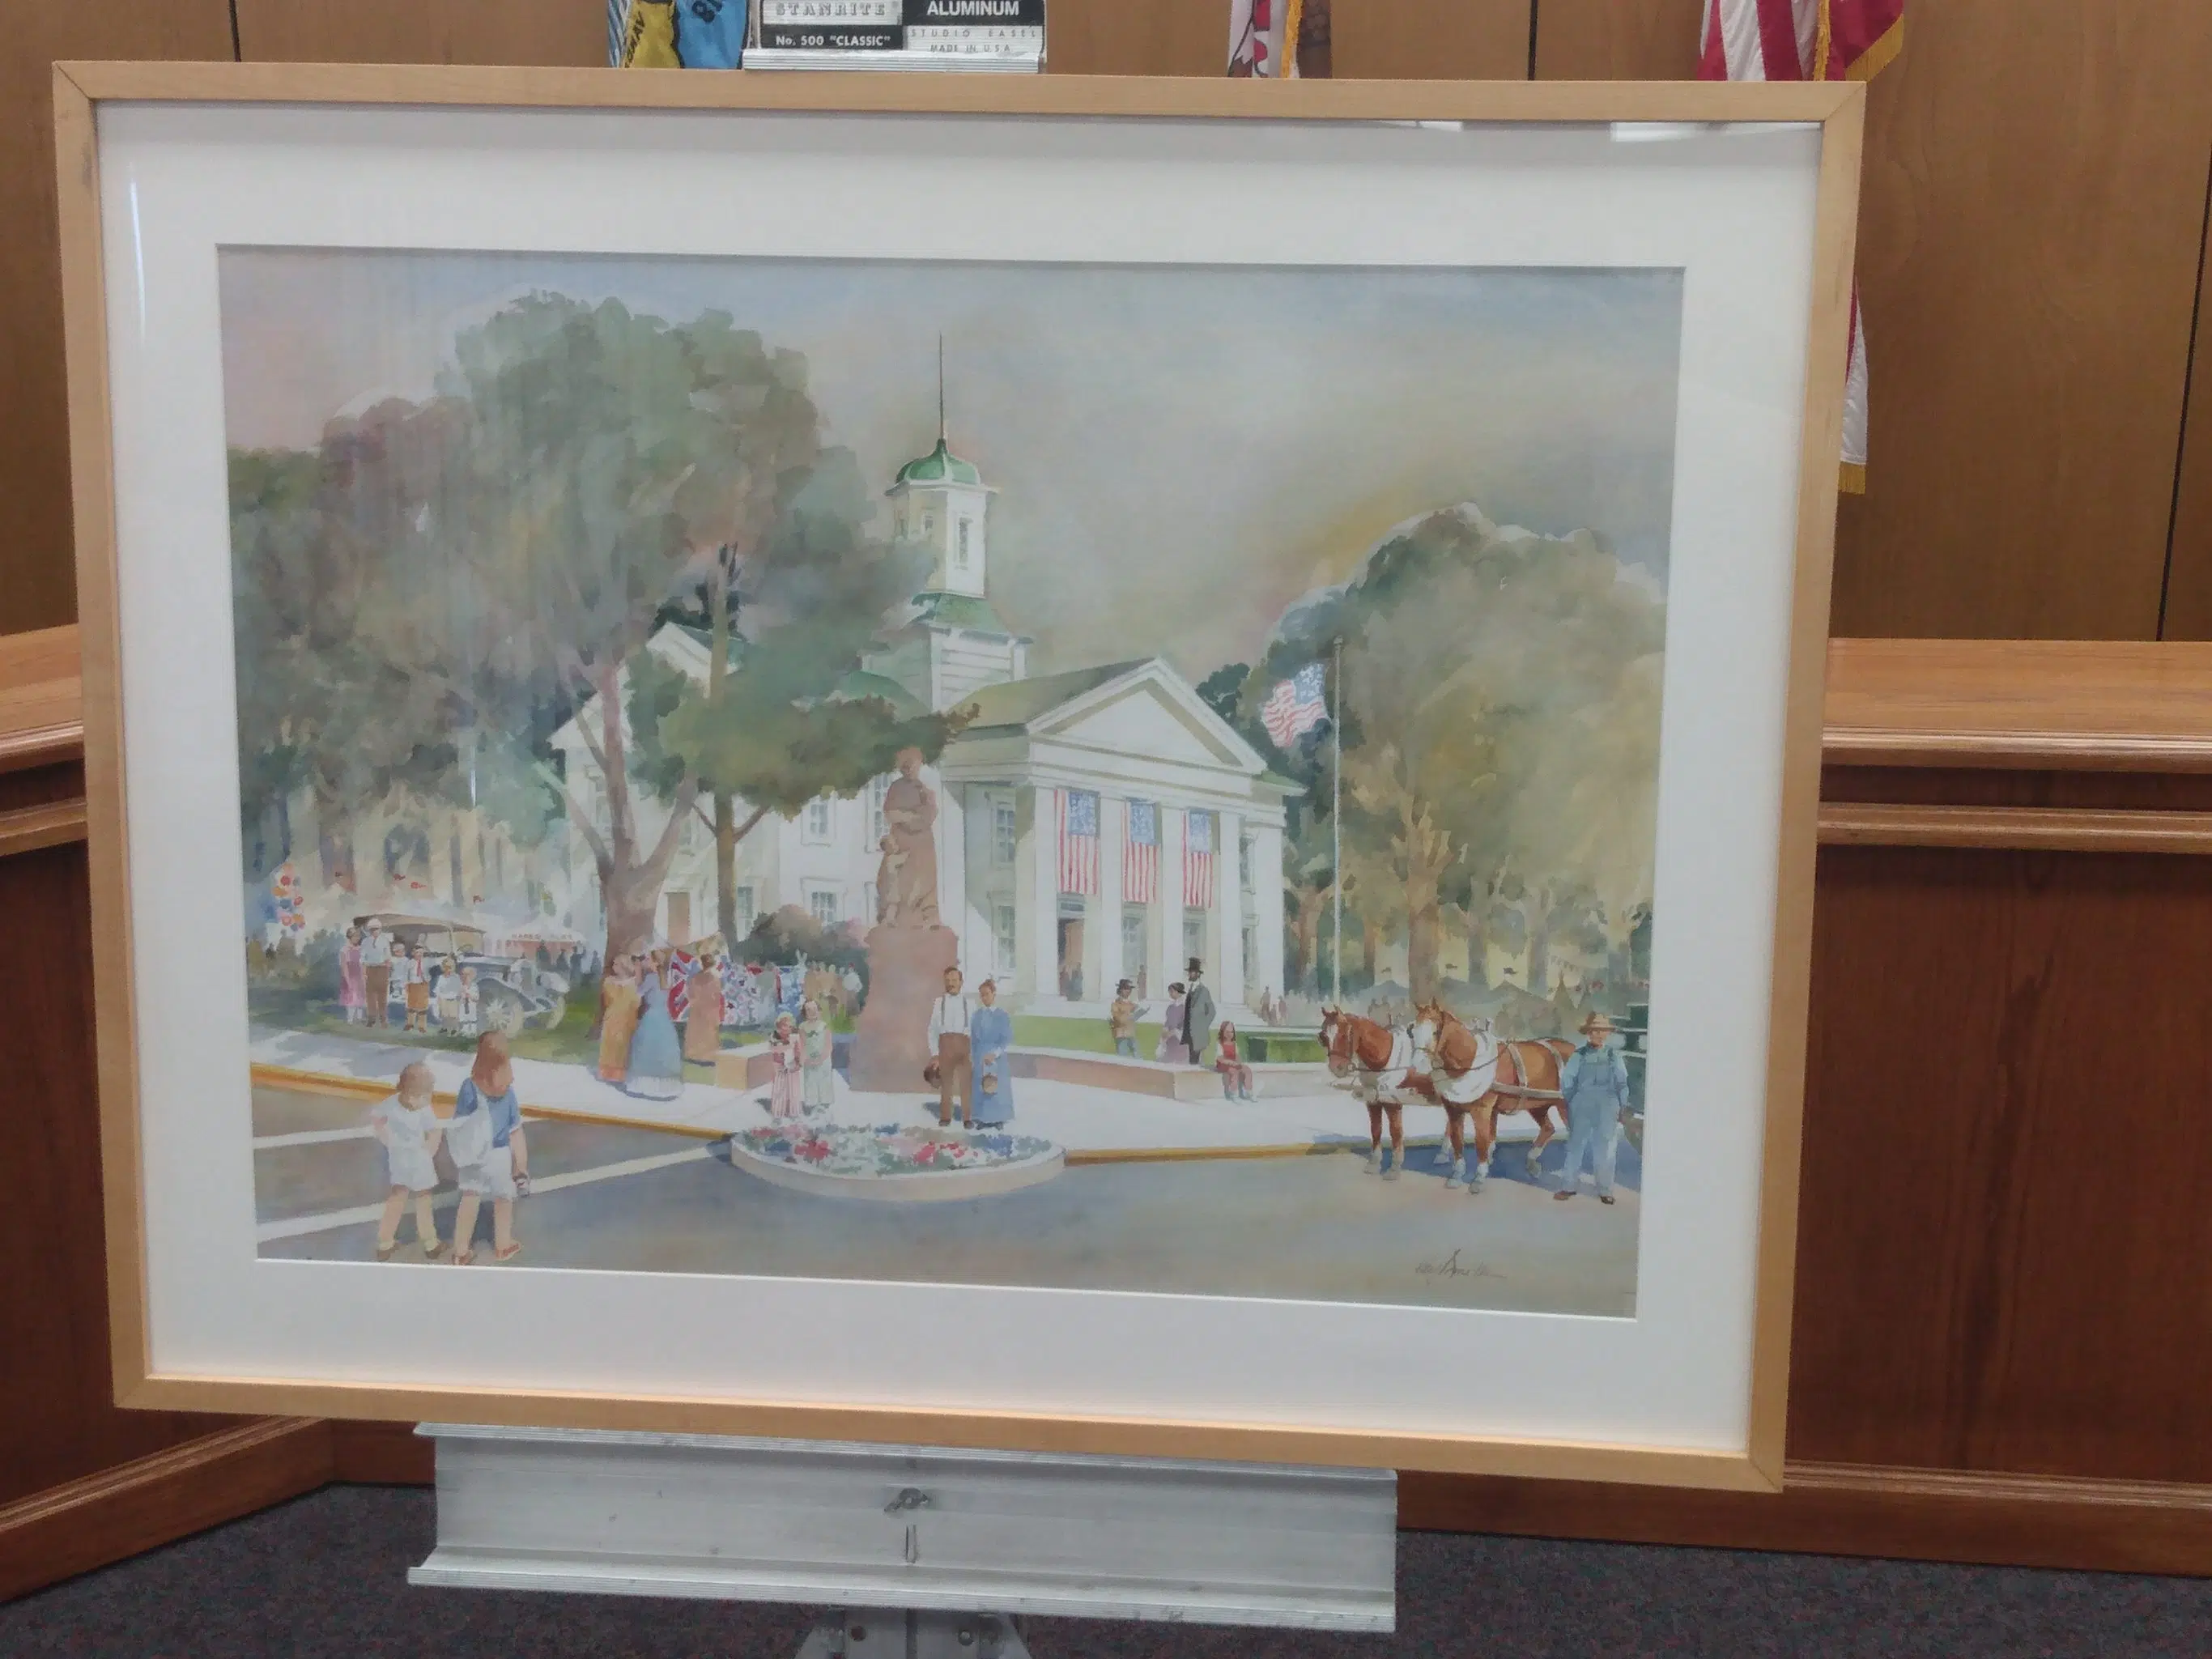 Artist Laureate and Fayette Co native Kay Smith donates painting to City of Vandalia